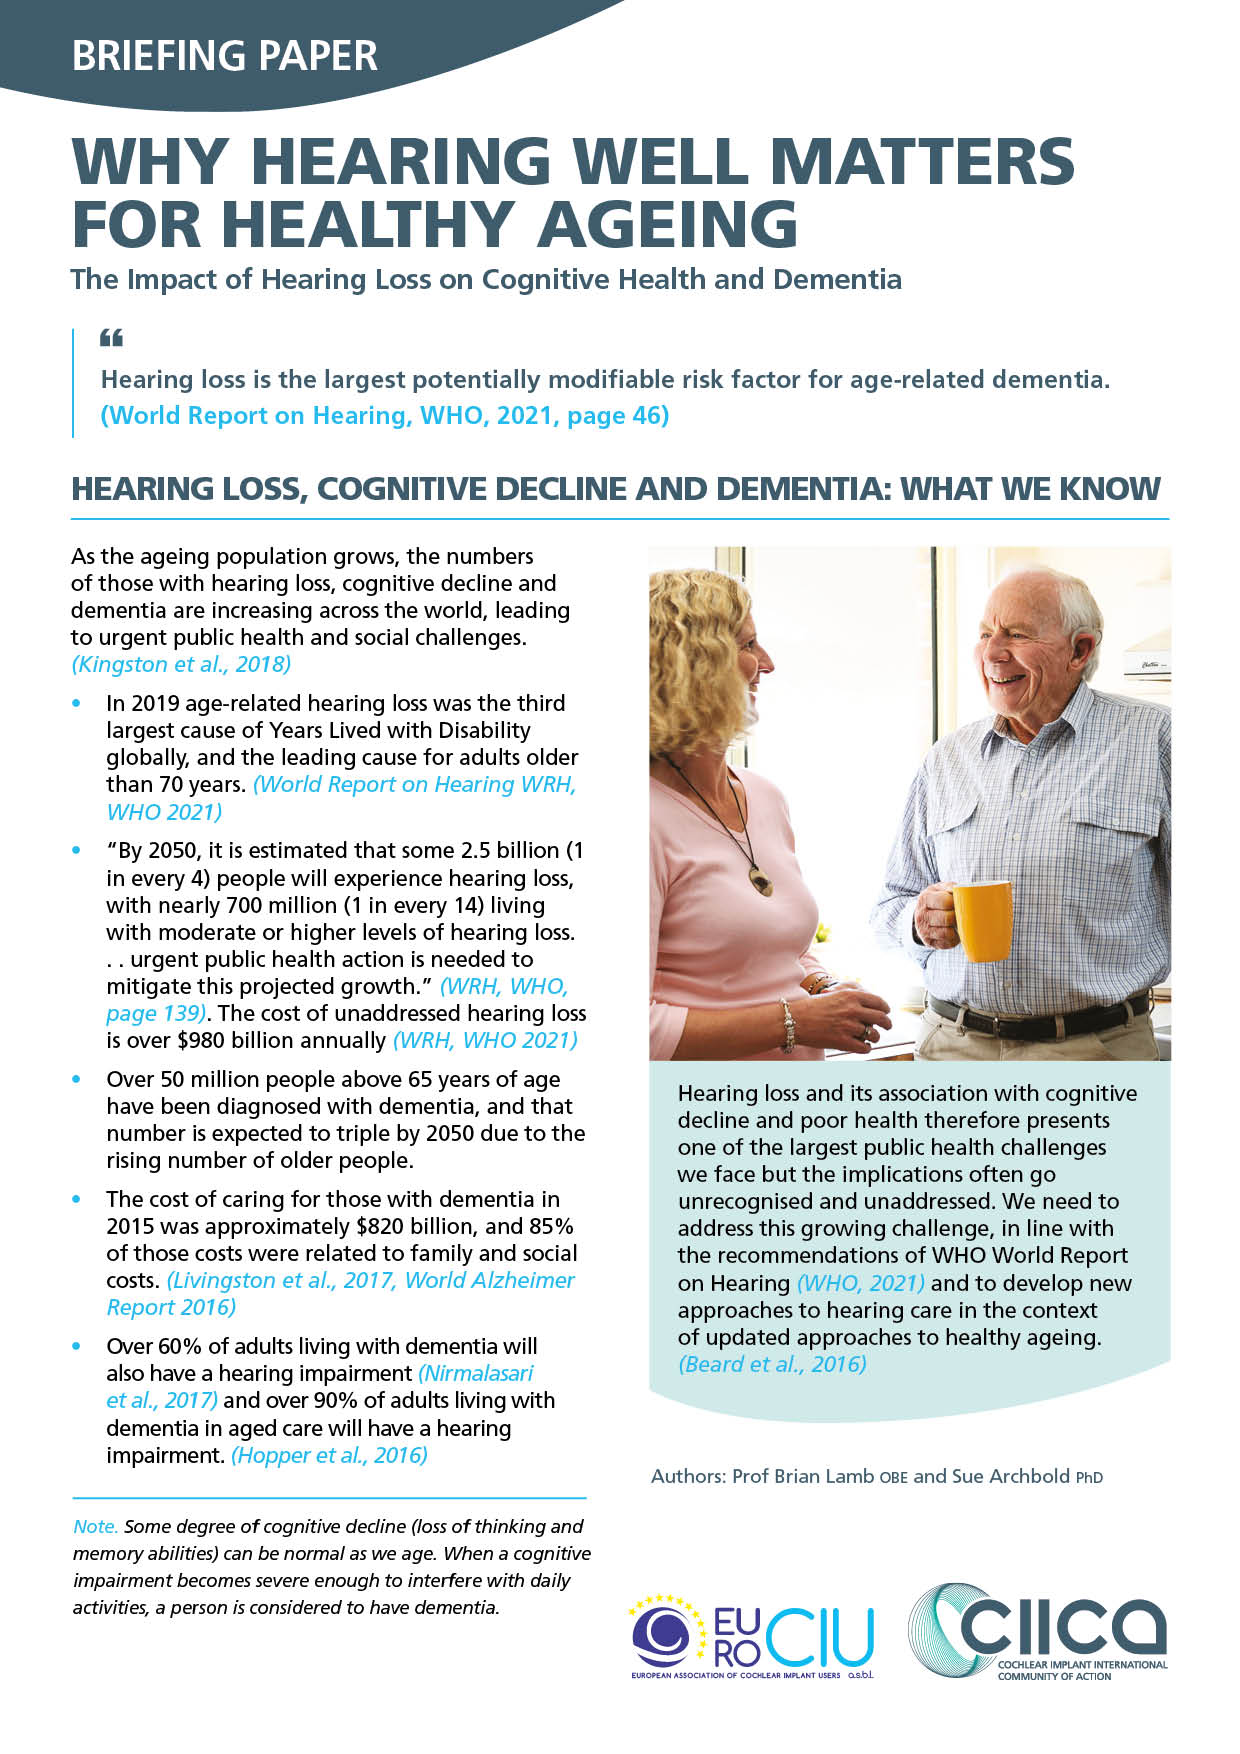 CIICA and EUROCIU launch new resource: WHY HEARING WELL MATTERS FOR HEALTHY AGEING